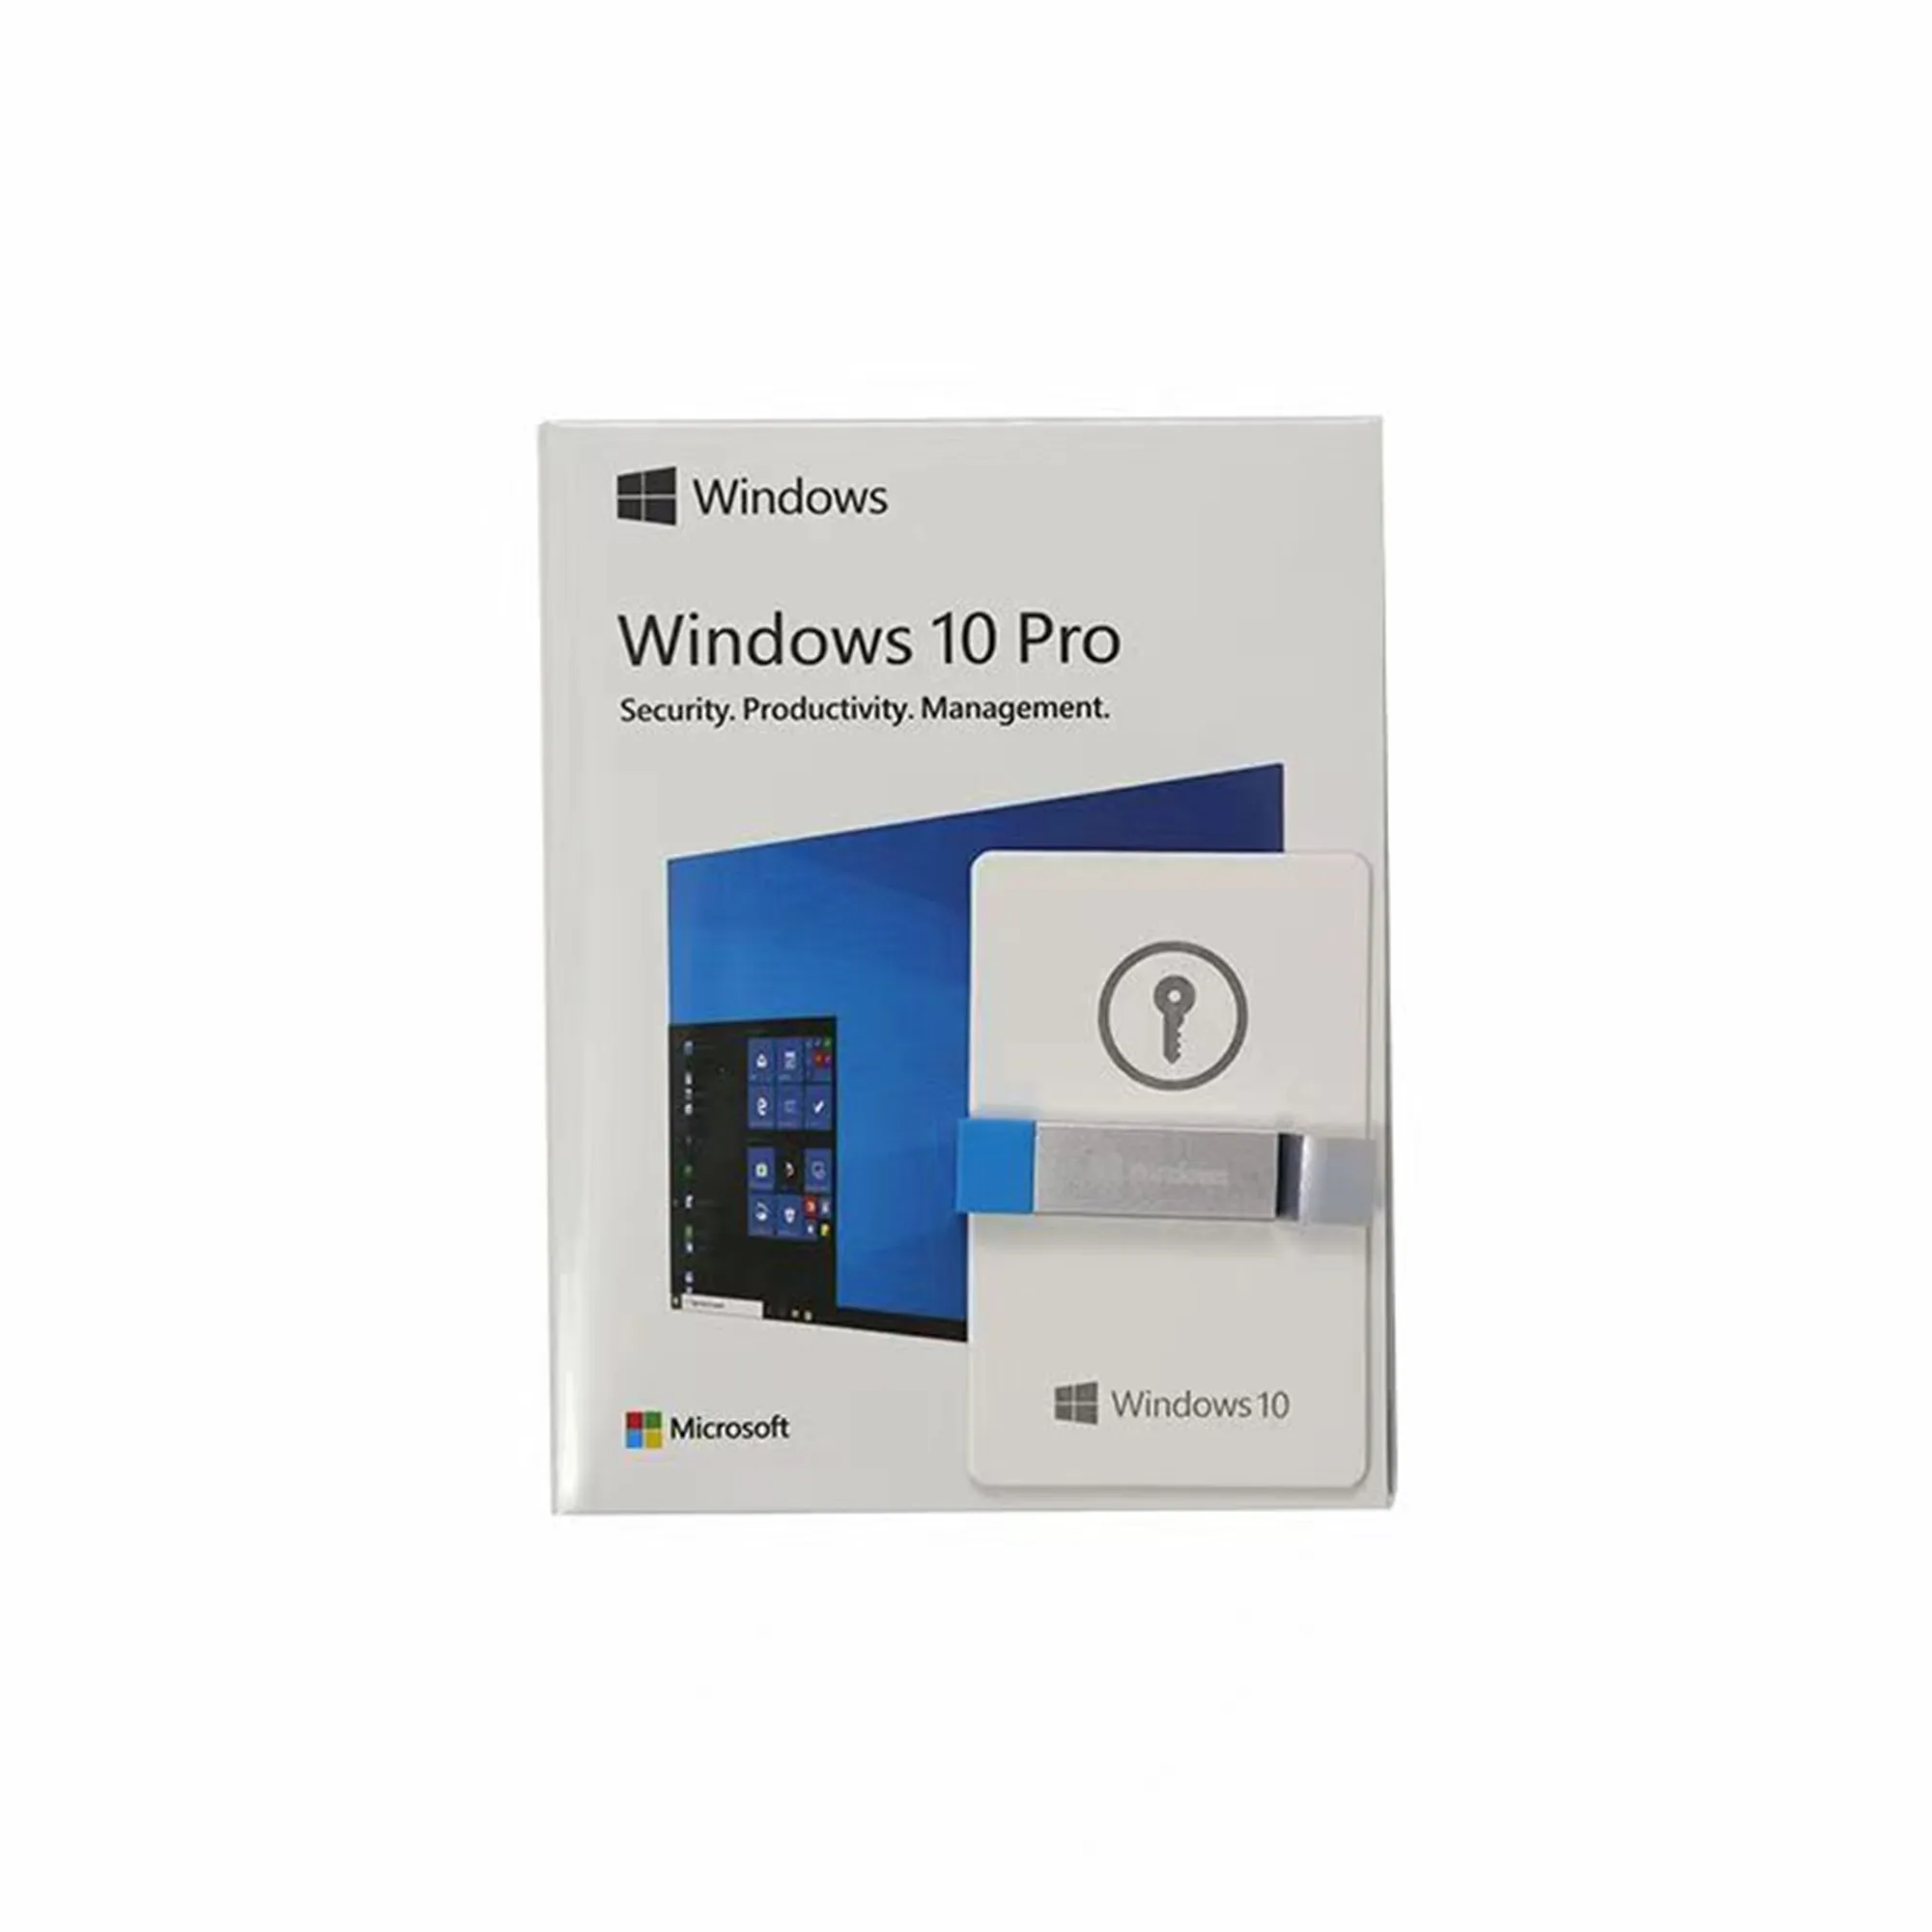 Win 10 Professinal USB 3.0 full package DHL free shipping Win 10 Pro Stable Keys 12 Month Guaranteed for win 10 pro usb